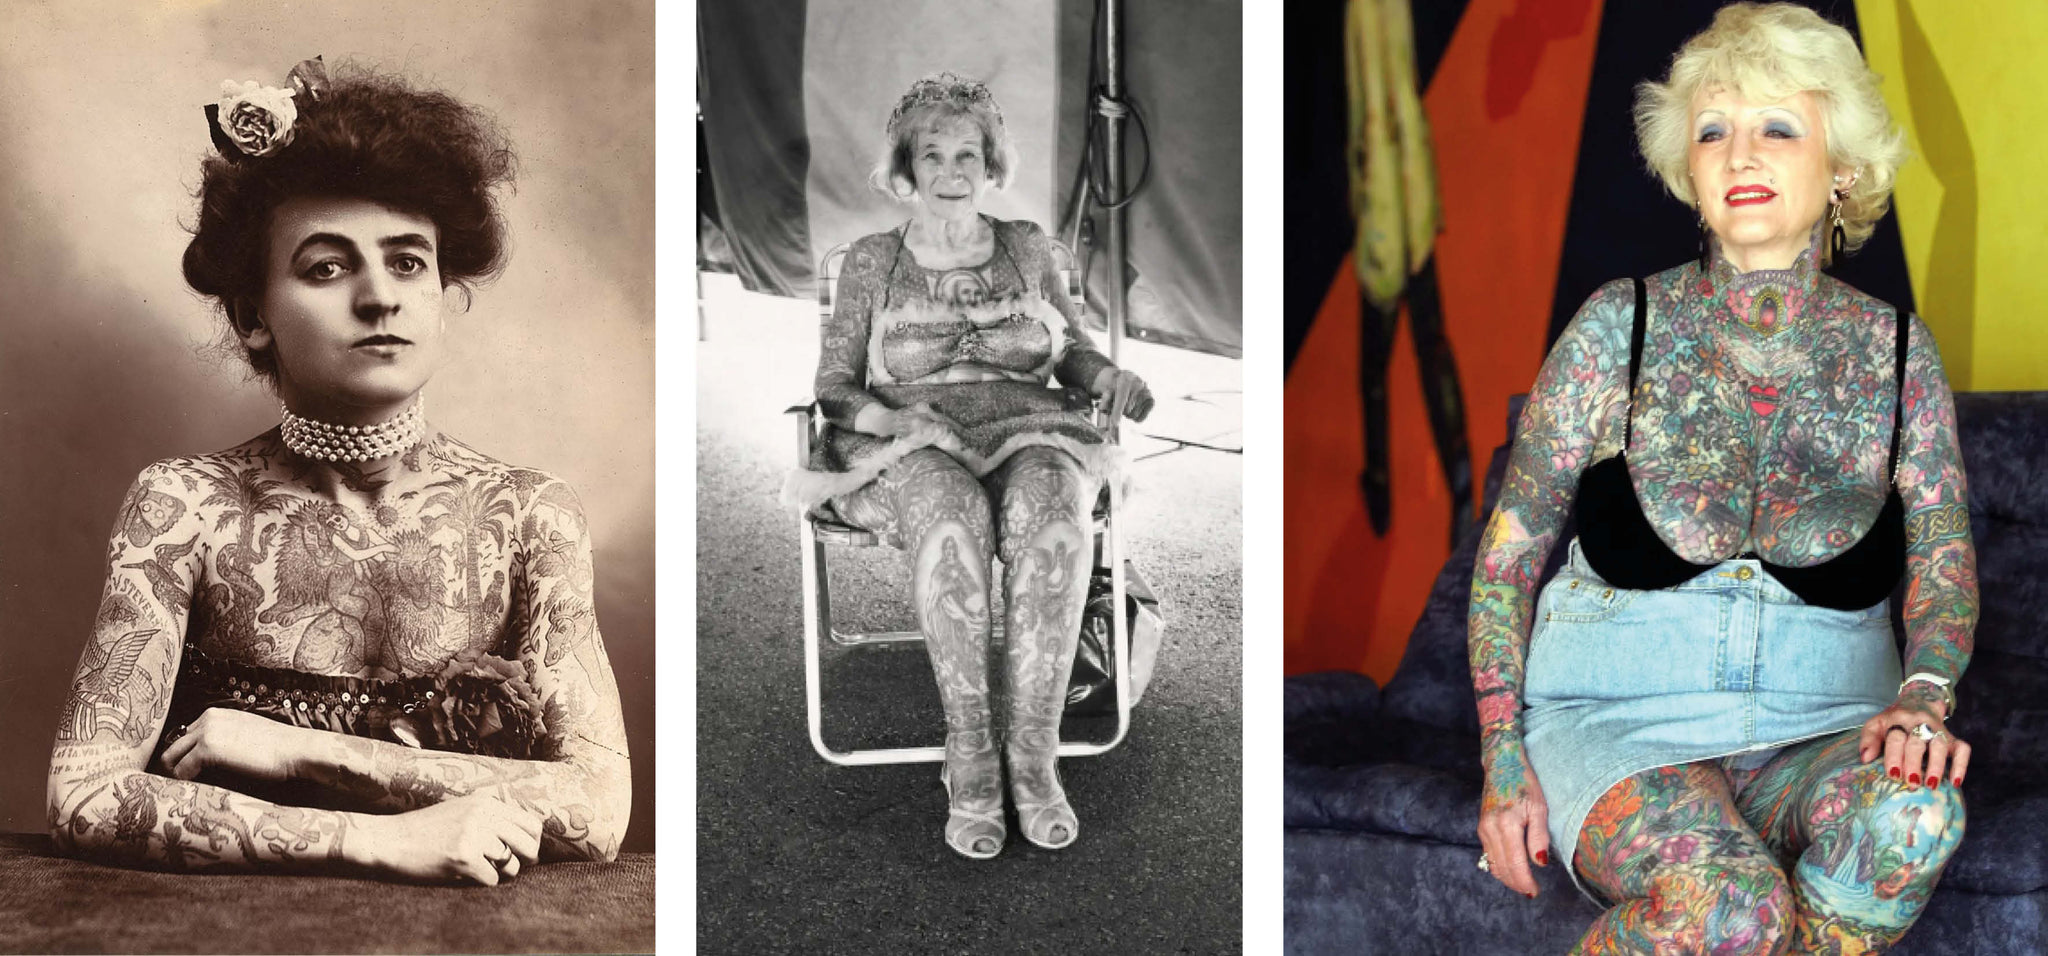 Tattooed icons: the badass women of tattooing who paved the way